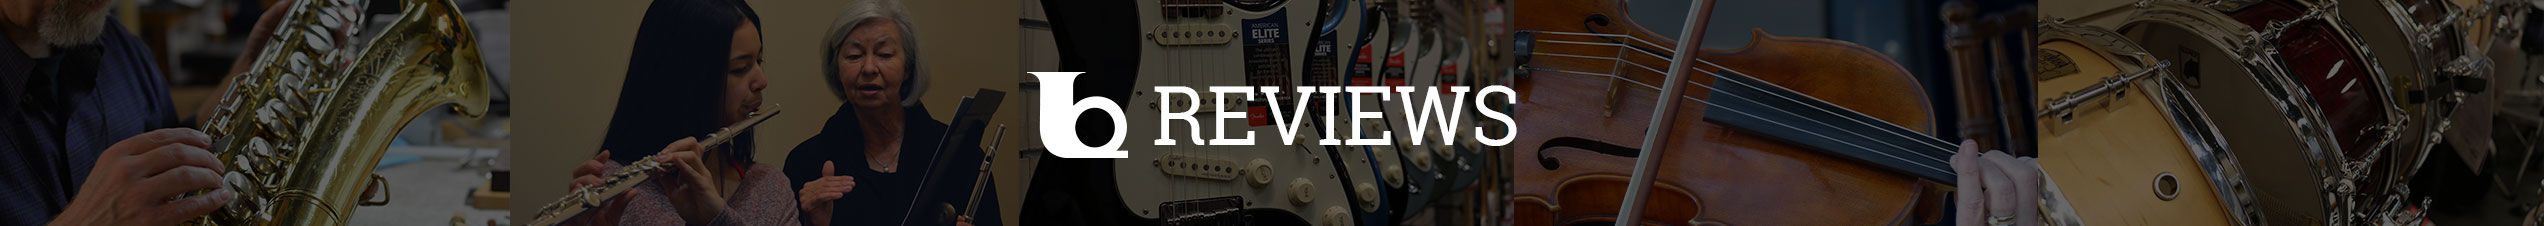 Ted Brown Music Reviews Banner